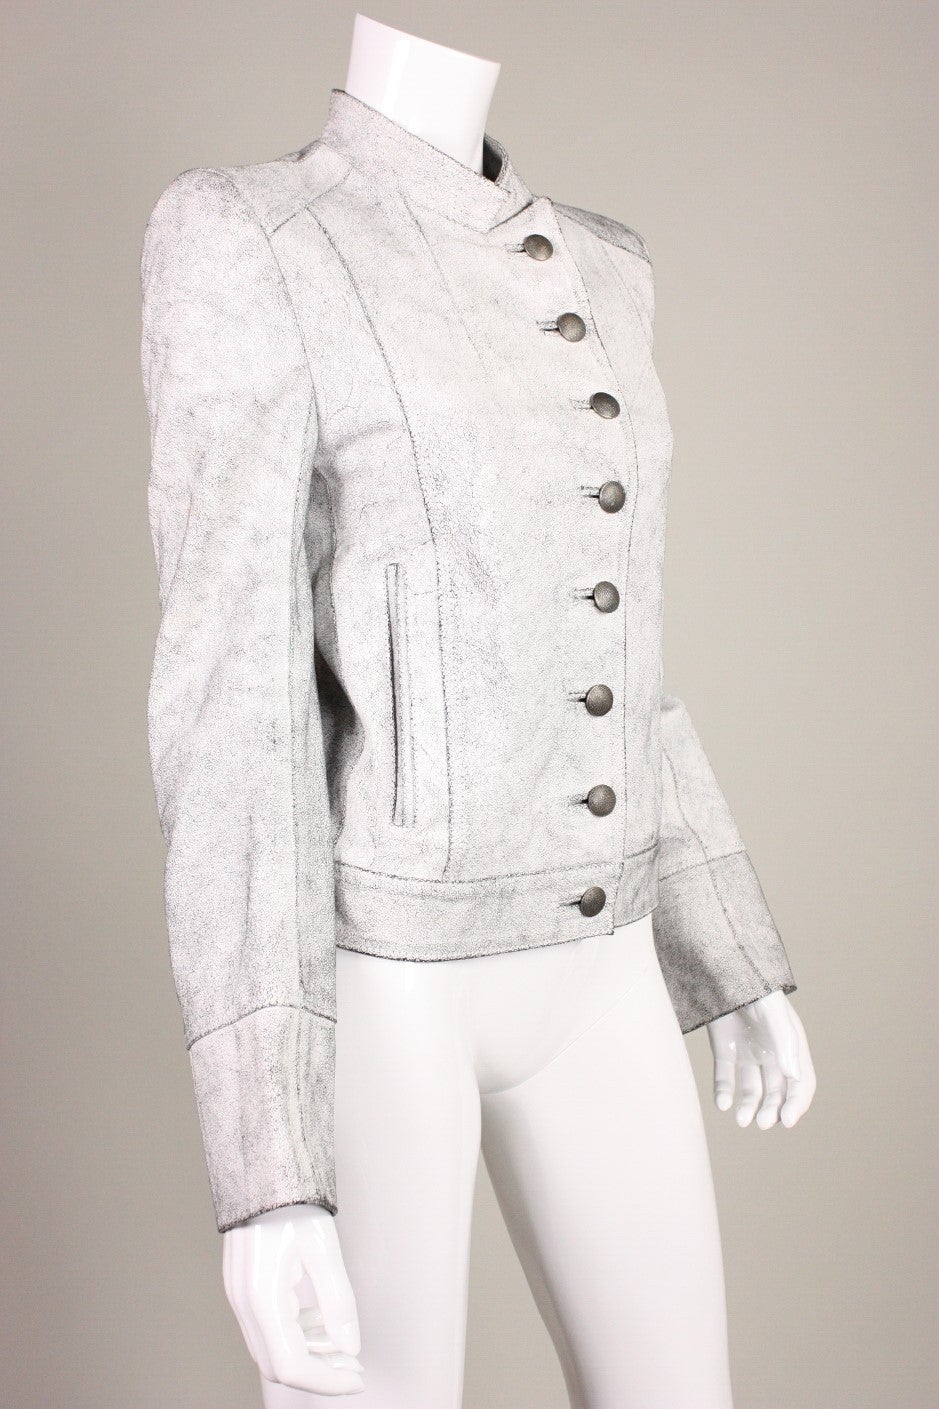 Military-inspired jacket from Ann Demeulemeester is made of textured leather with a crackle finish.  Stand collar.  Diagonal button closure with silver-toned buttons.  Fully lined.

Labeled size 36.

Measurements-
Bust: 34